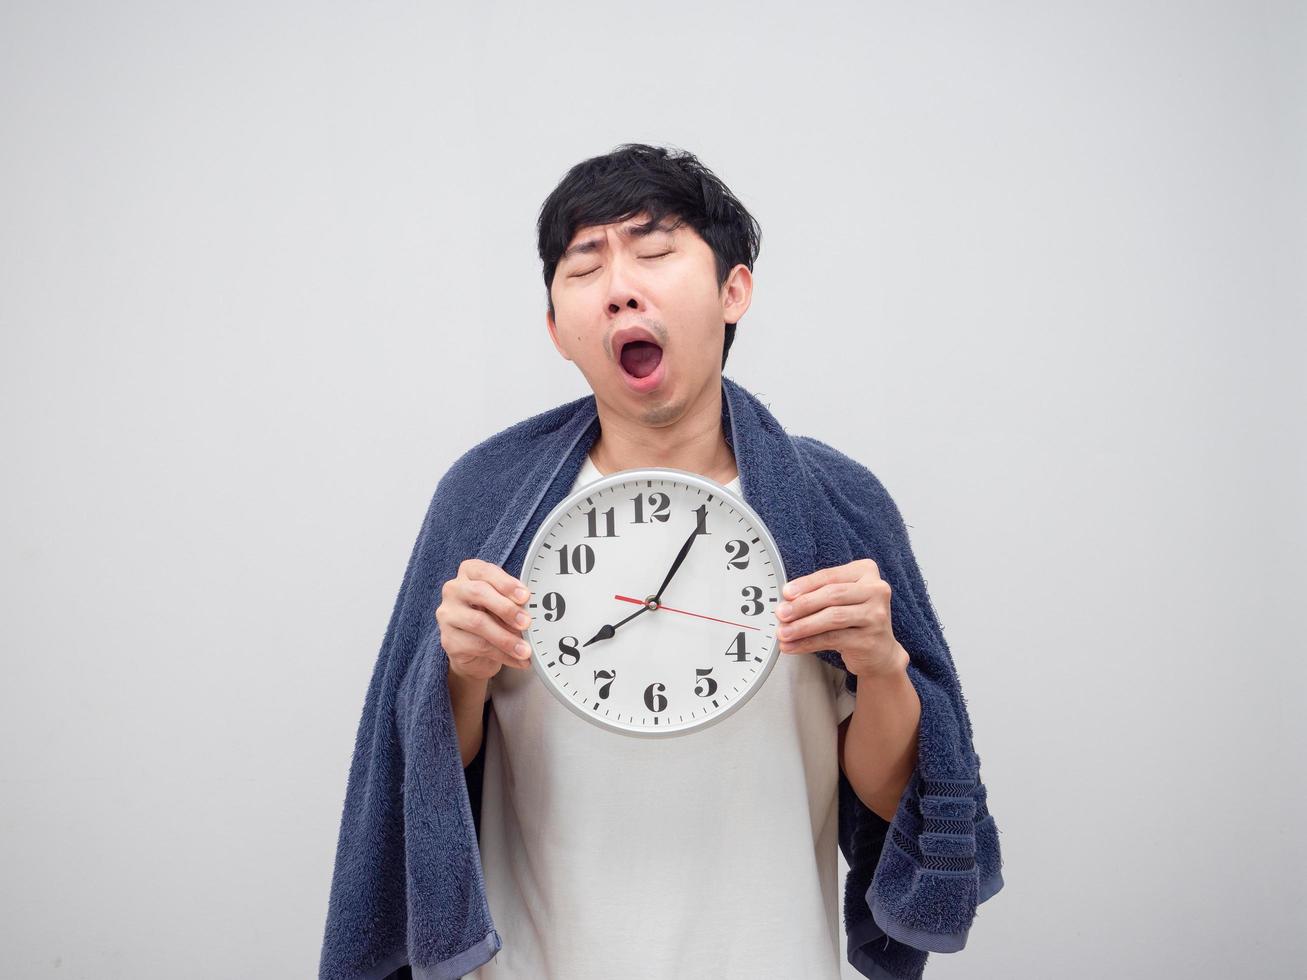 Sleepy man yawn show clock in his hand and cover body by towel on white background photo